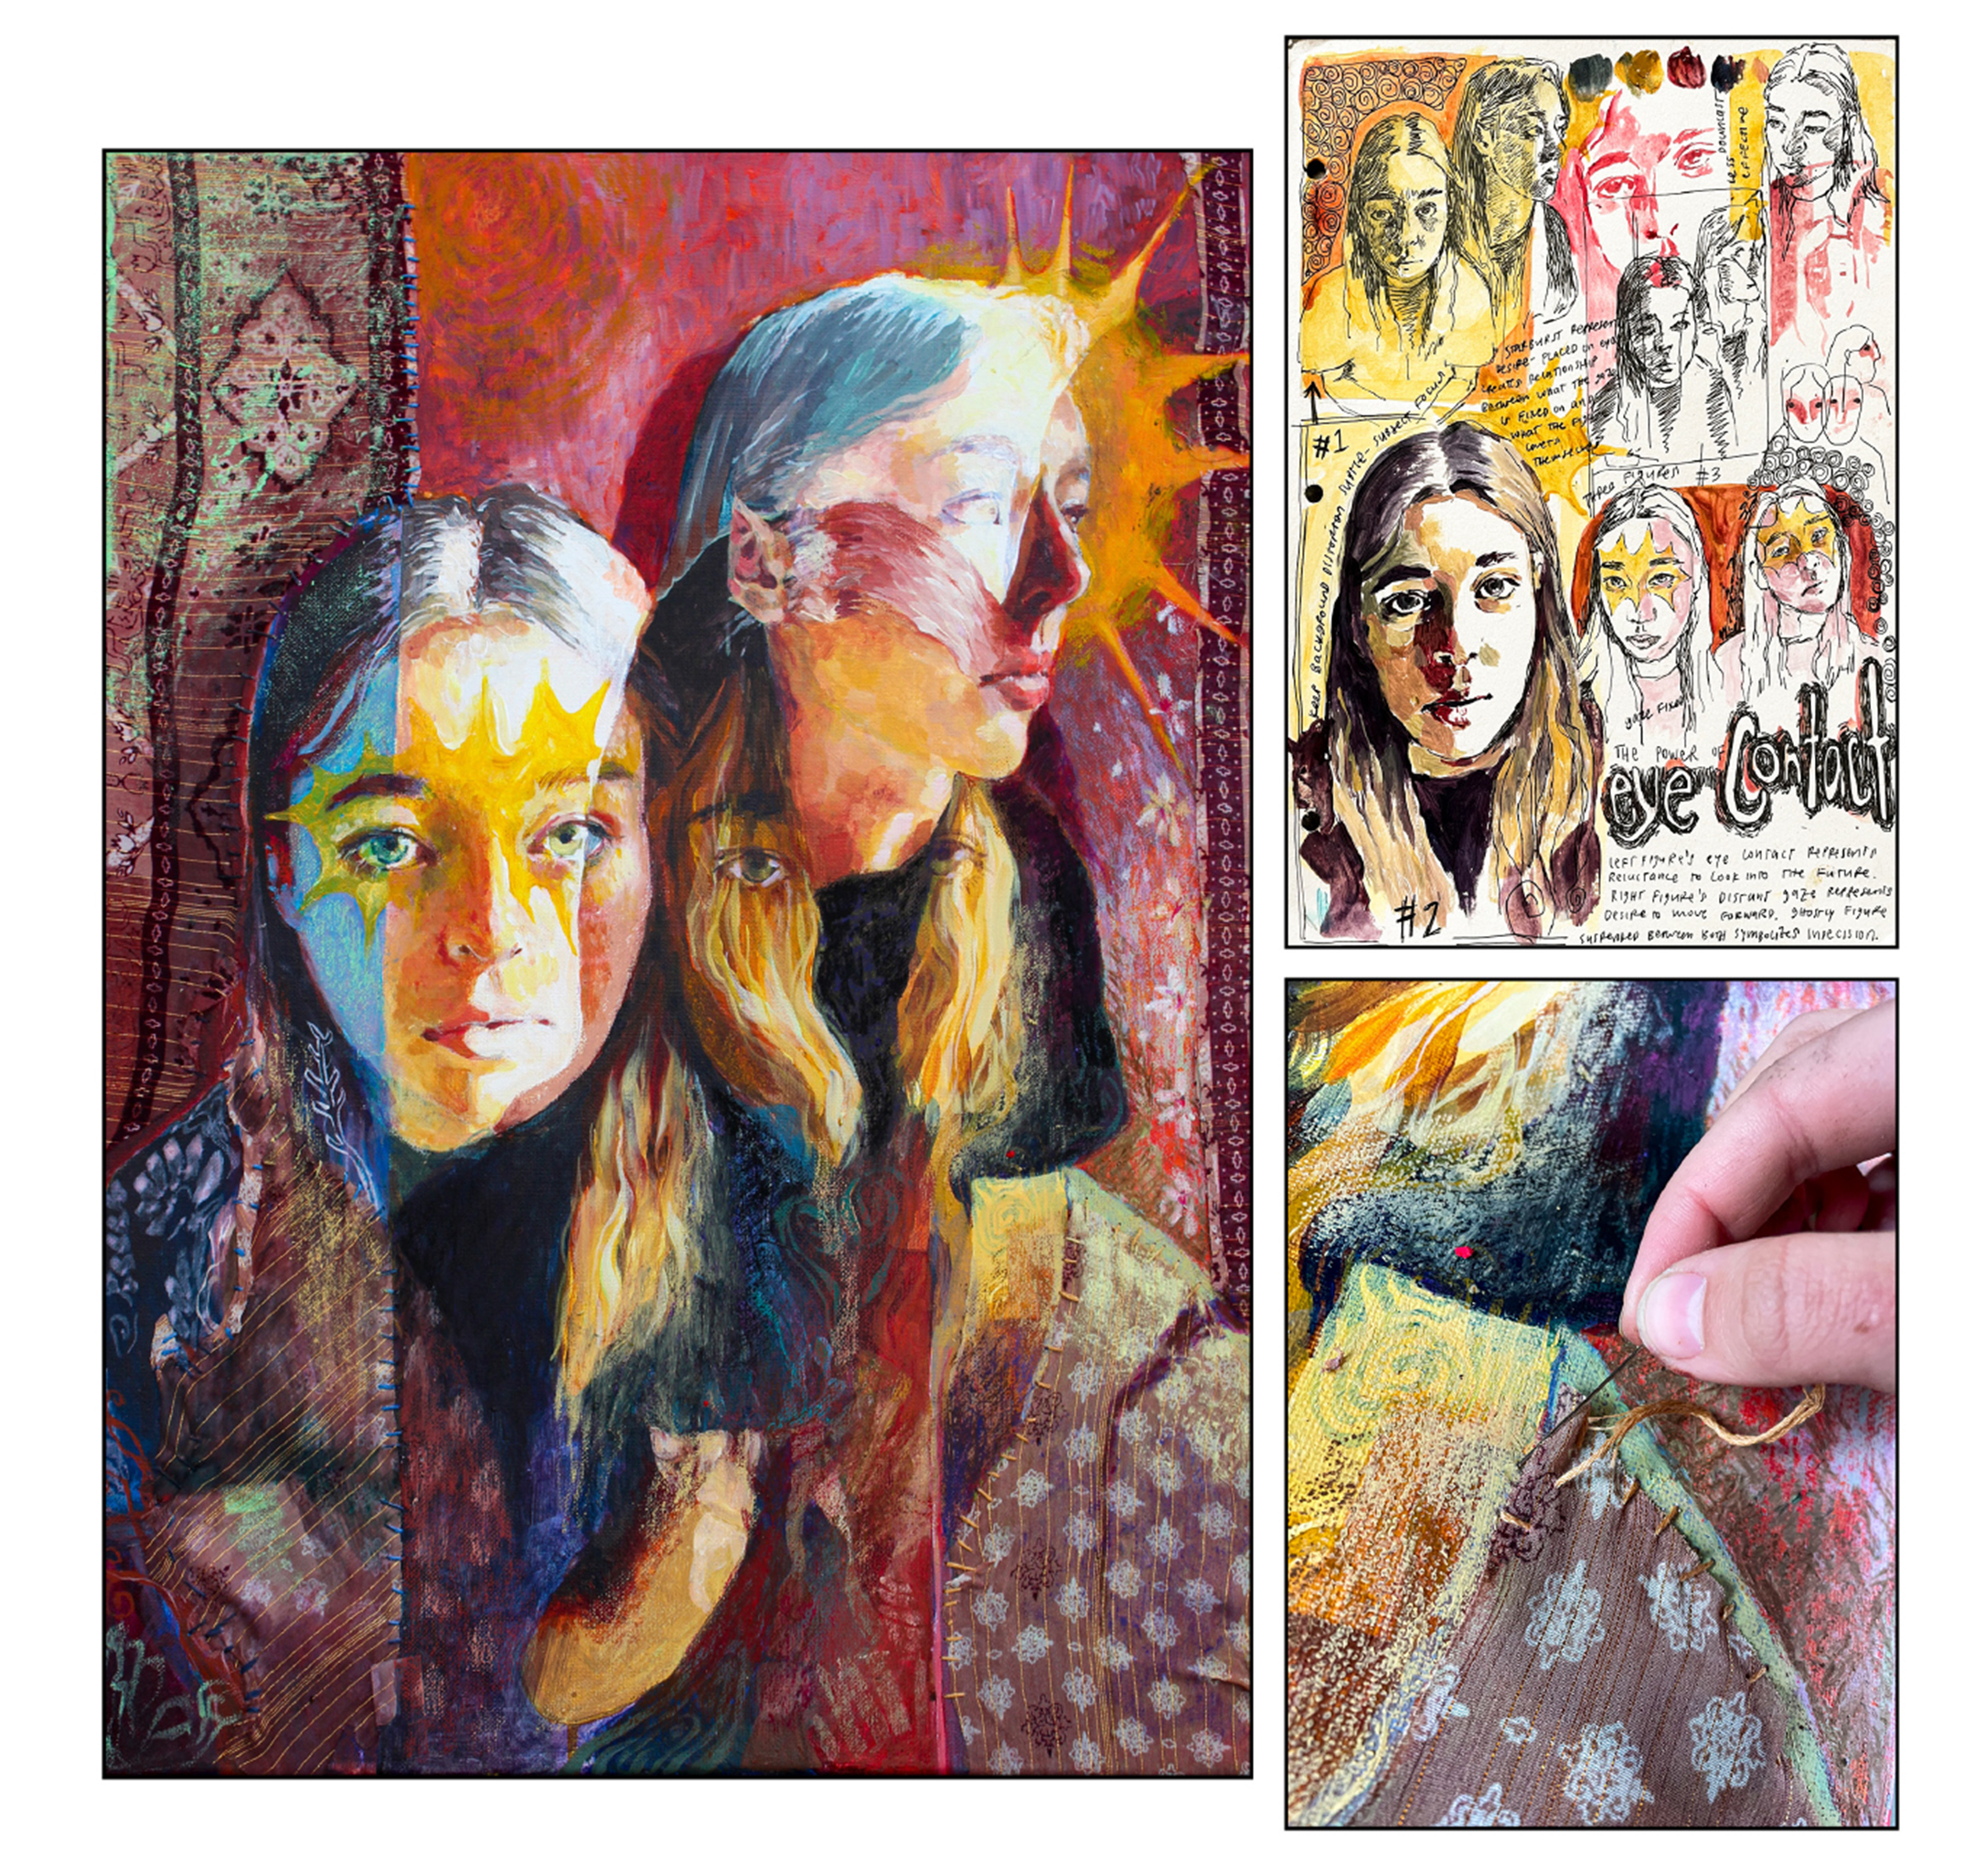 Painting of three young women on the left, two process images of the painting on the right